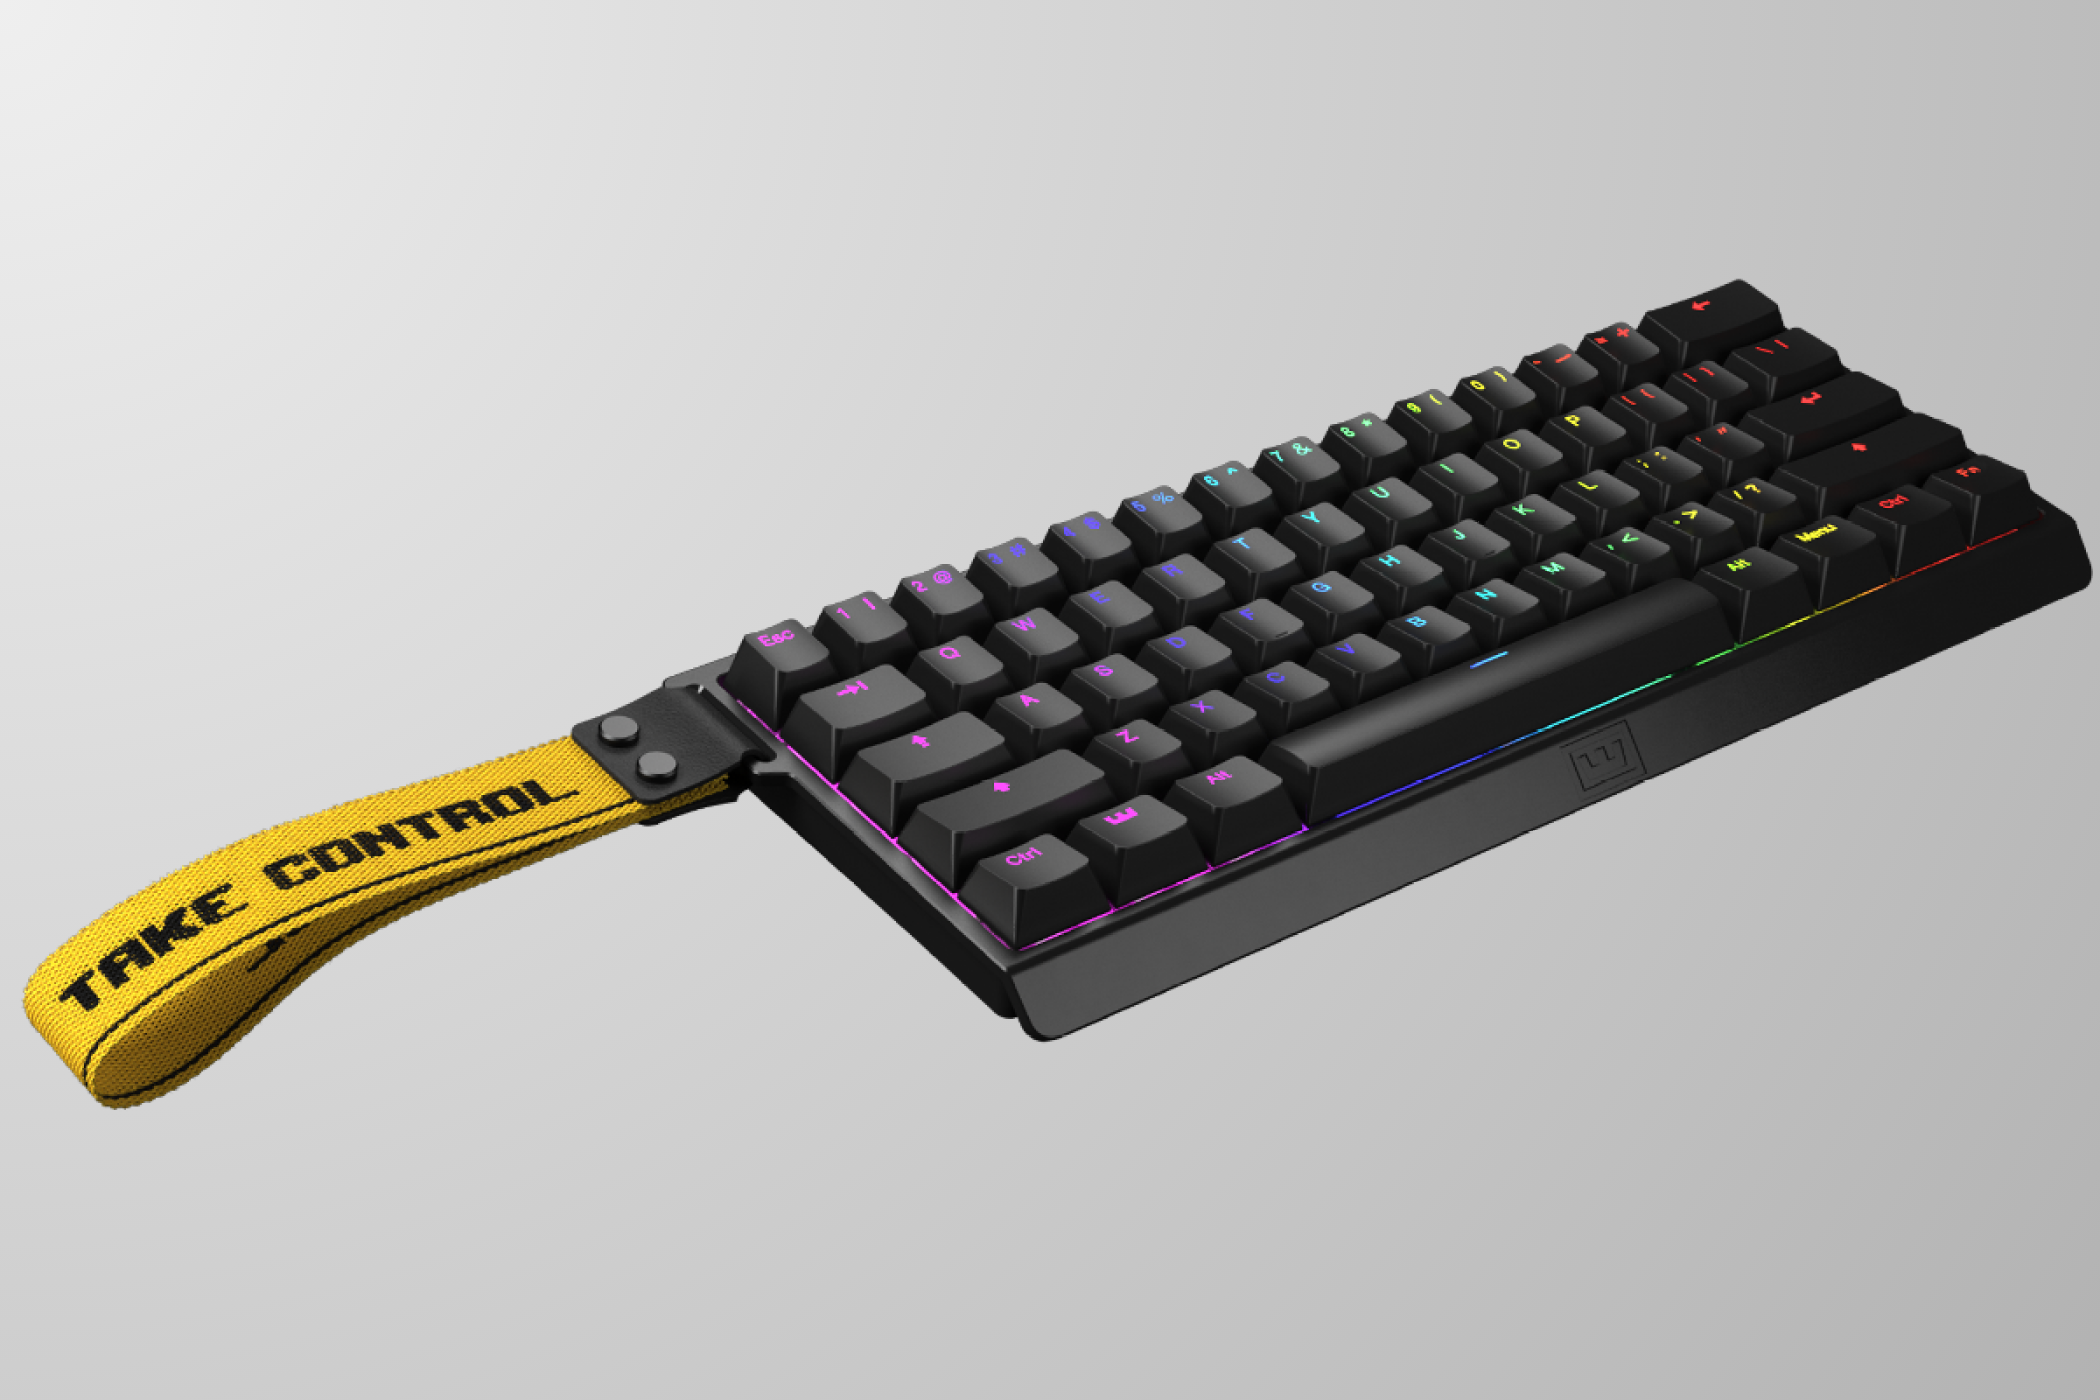 This Is the Next Big Thing in Mechanical Gaming Keyboards